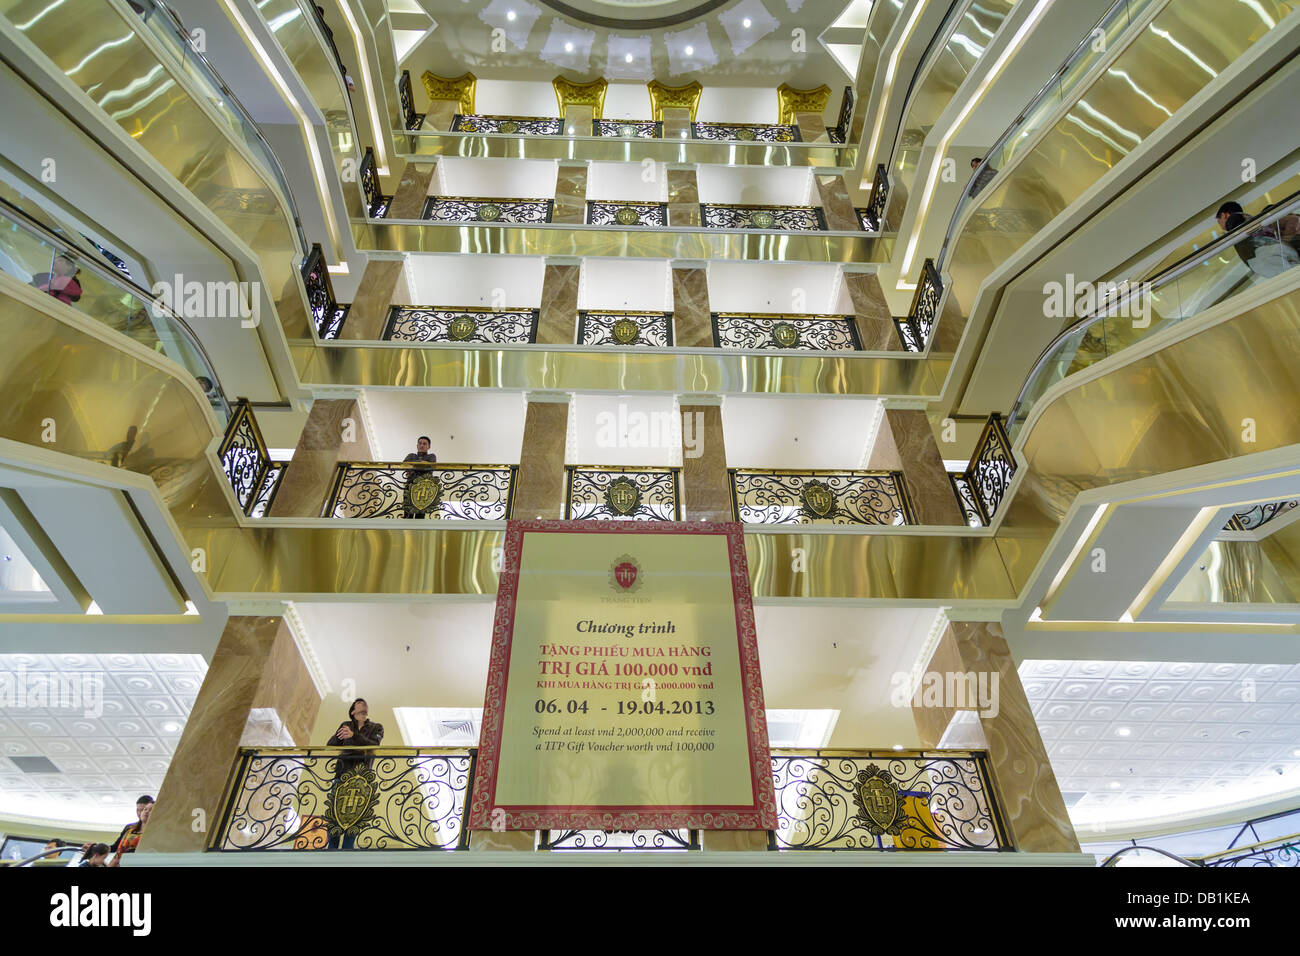 Trang Tien Plaza, Luxuary Department Store. Louis Vuitton. Hanoi. Vietnam.  Stock Photo, Picture and Royalty Free Image. Image 179915630.